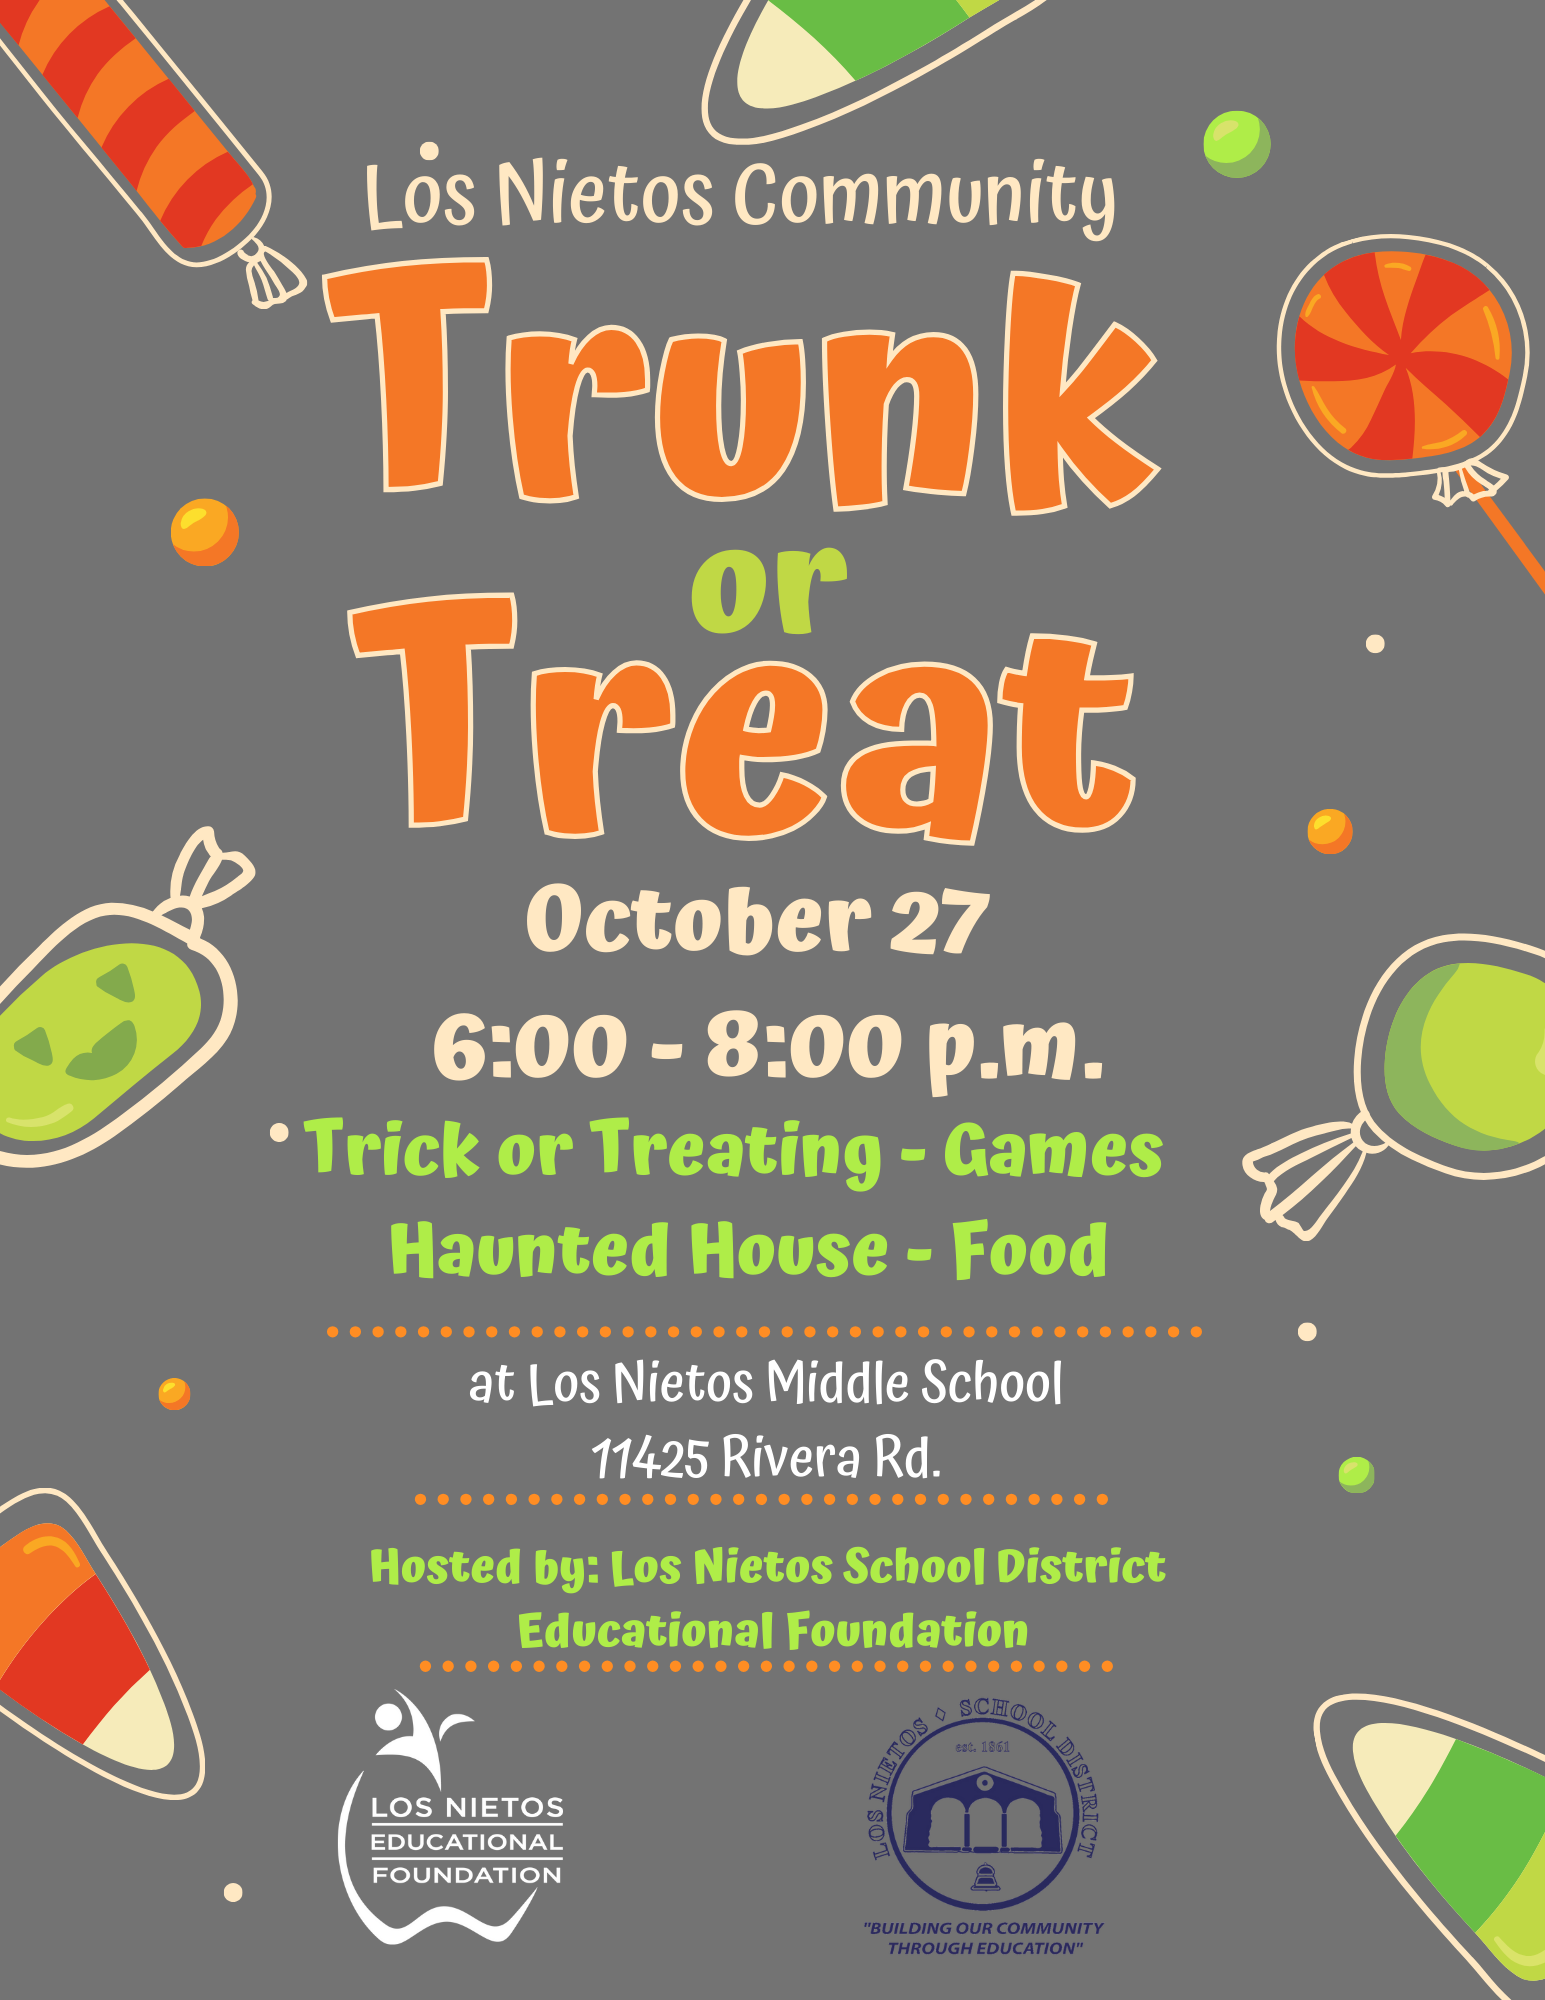 TRunk or treat 